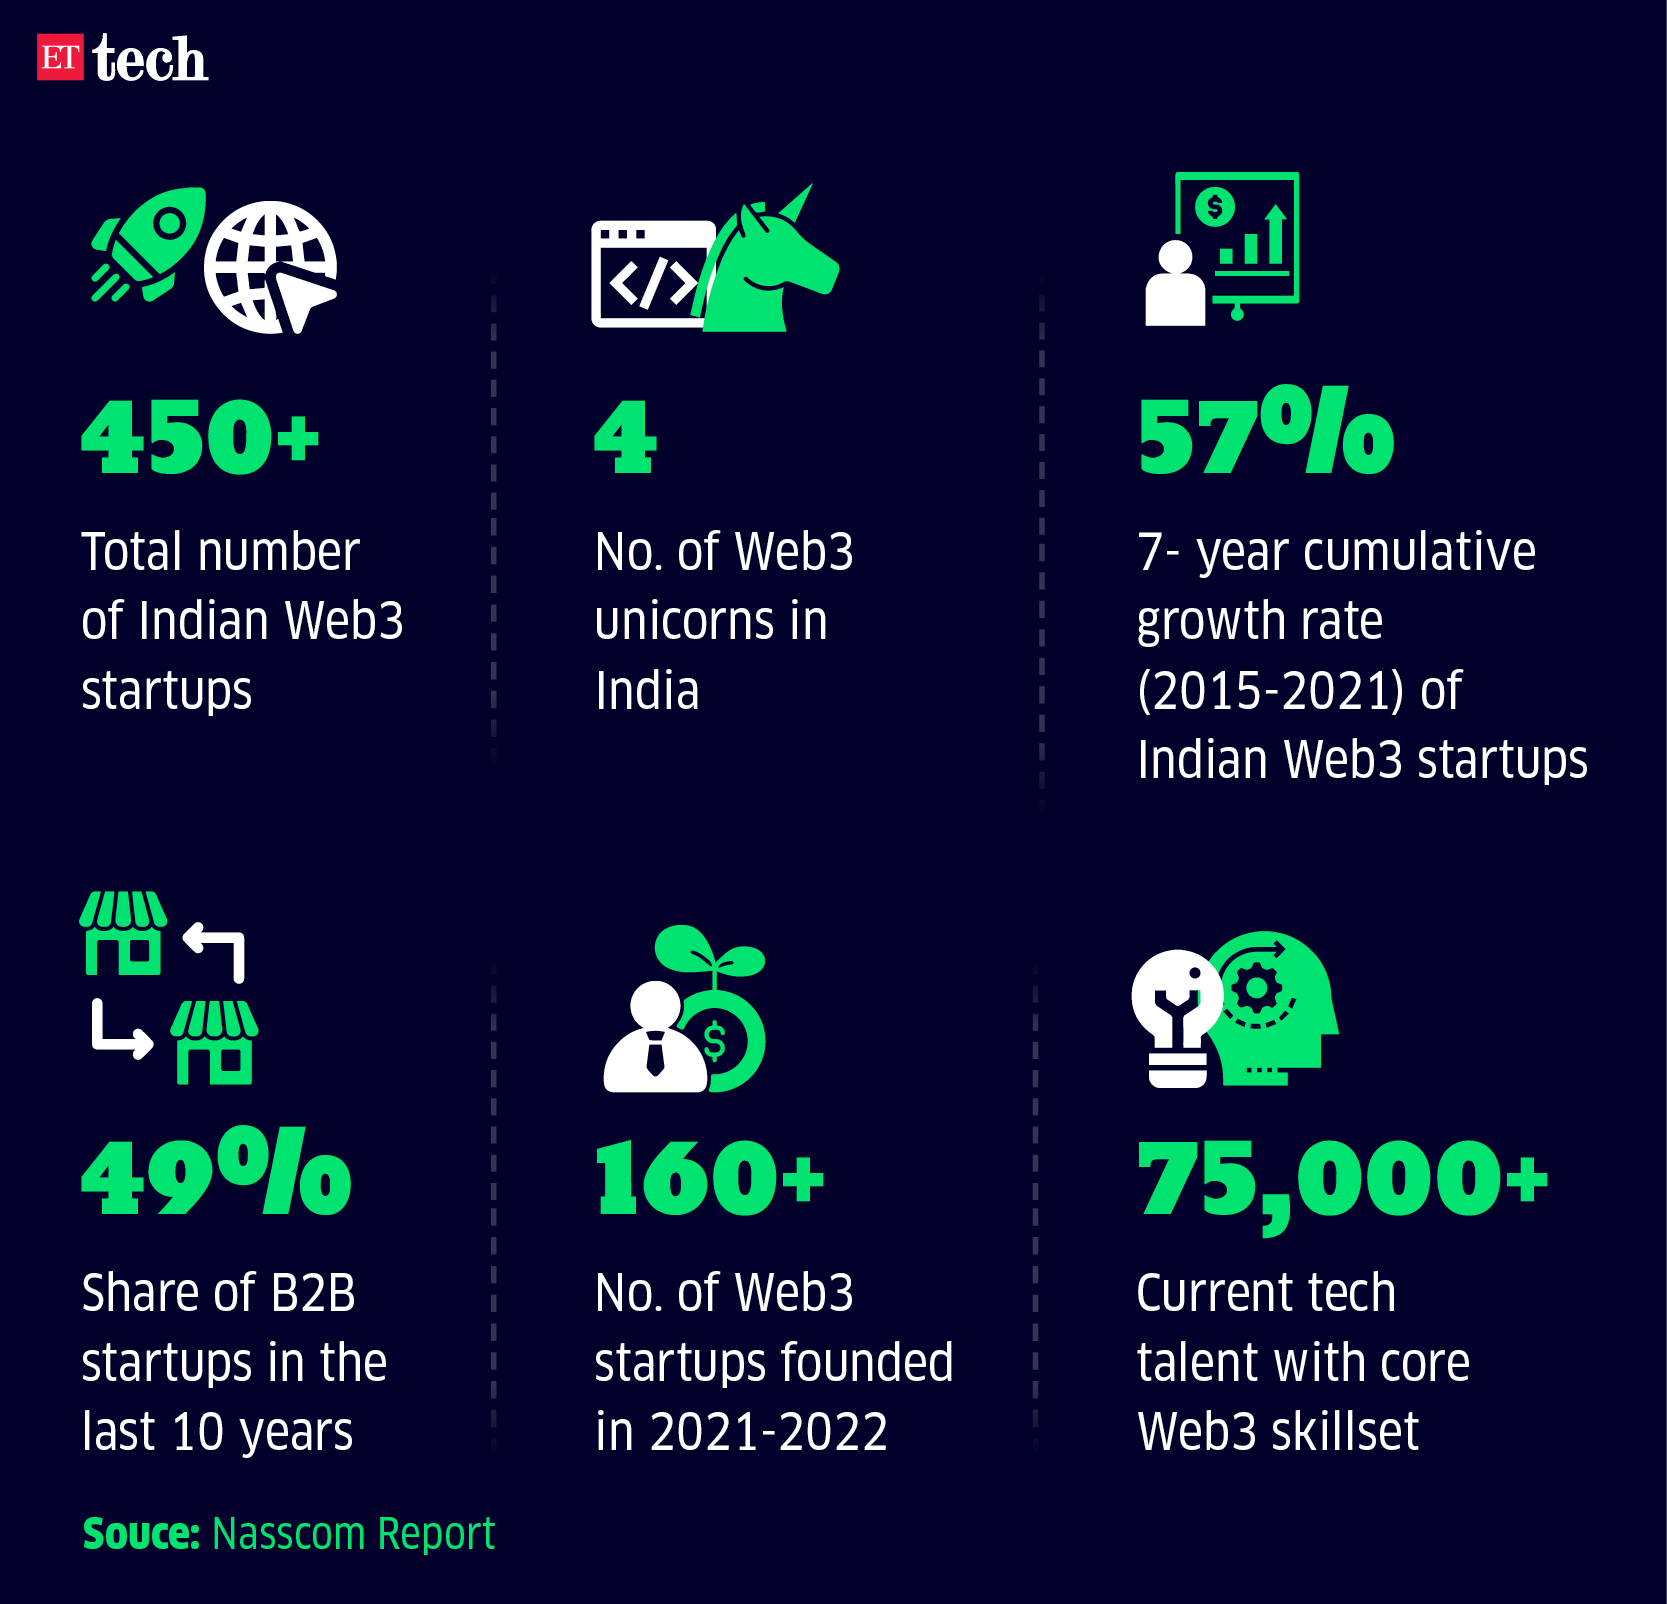 By the Numbers_19 Oct 2022_Graphic_ETTECH